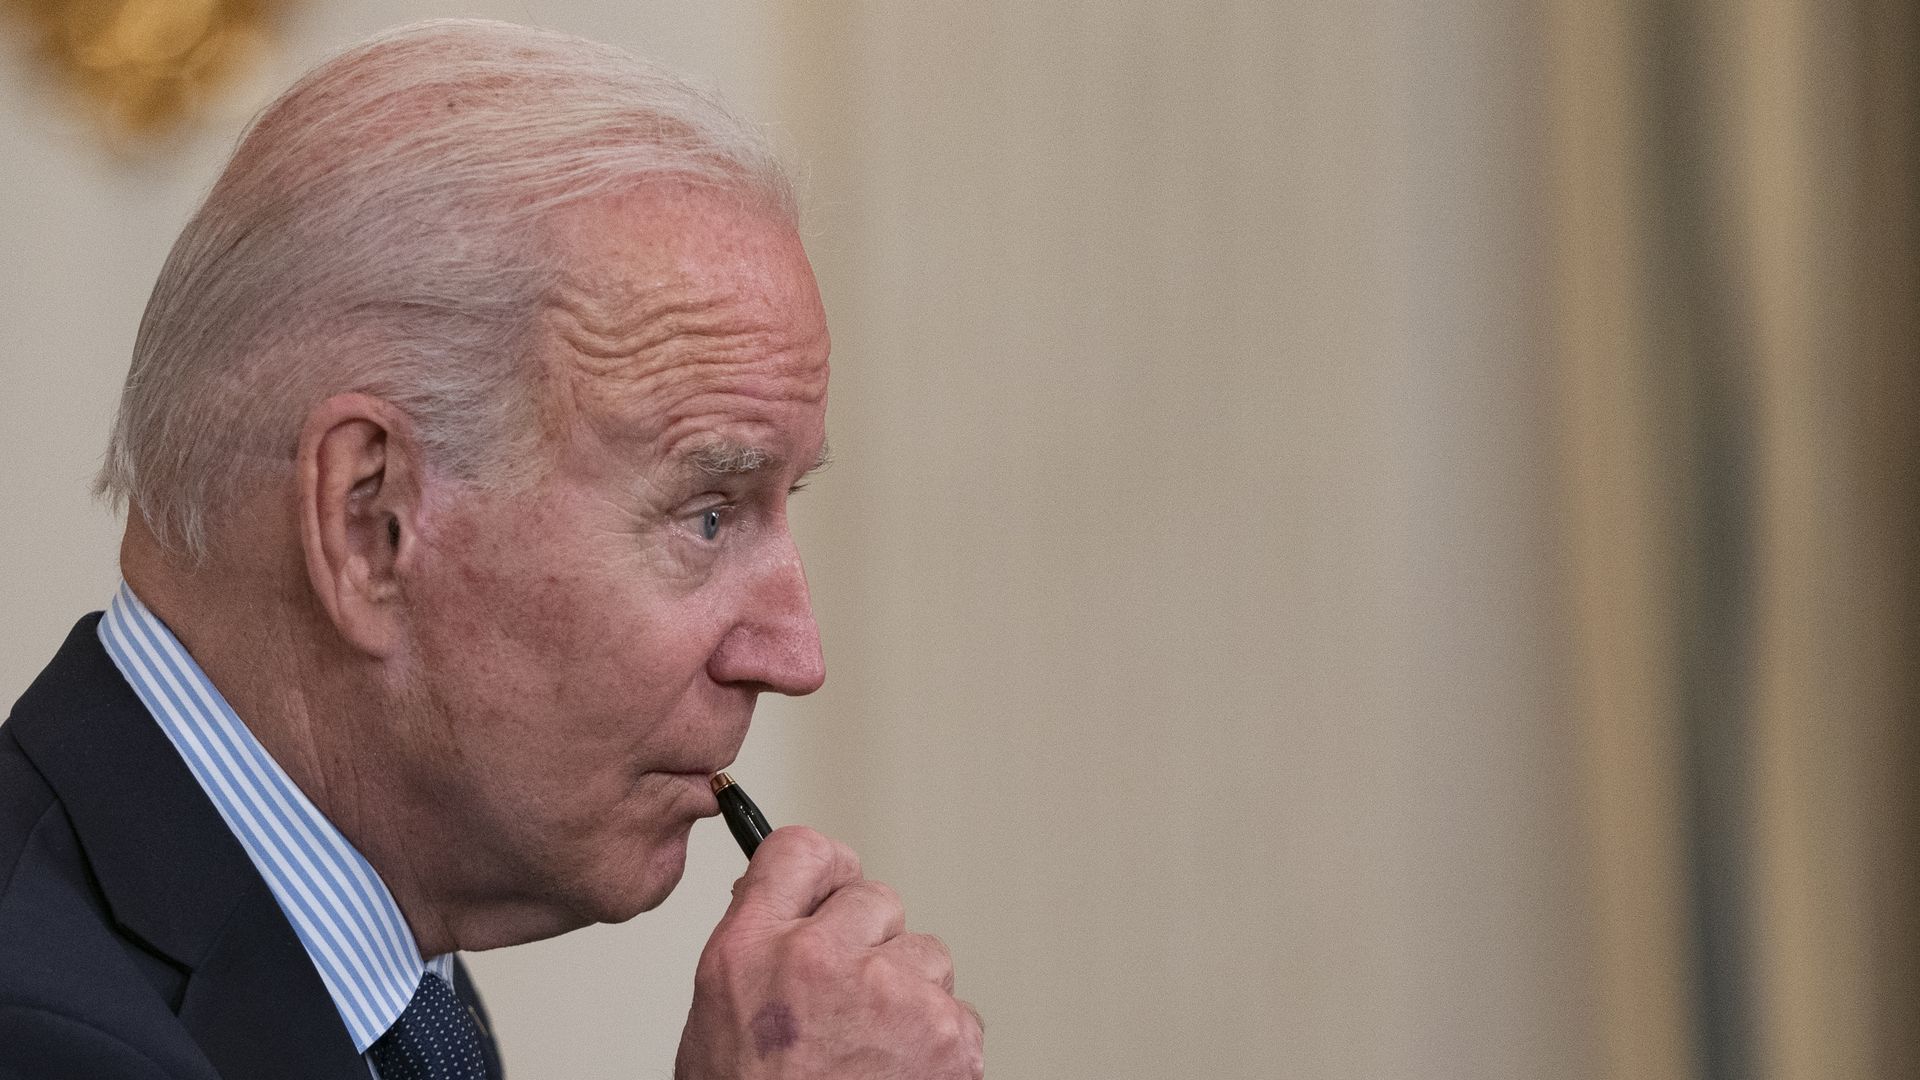 President Biden is seen listening to a question after delivering remarks on Tuesday.